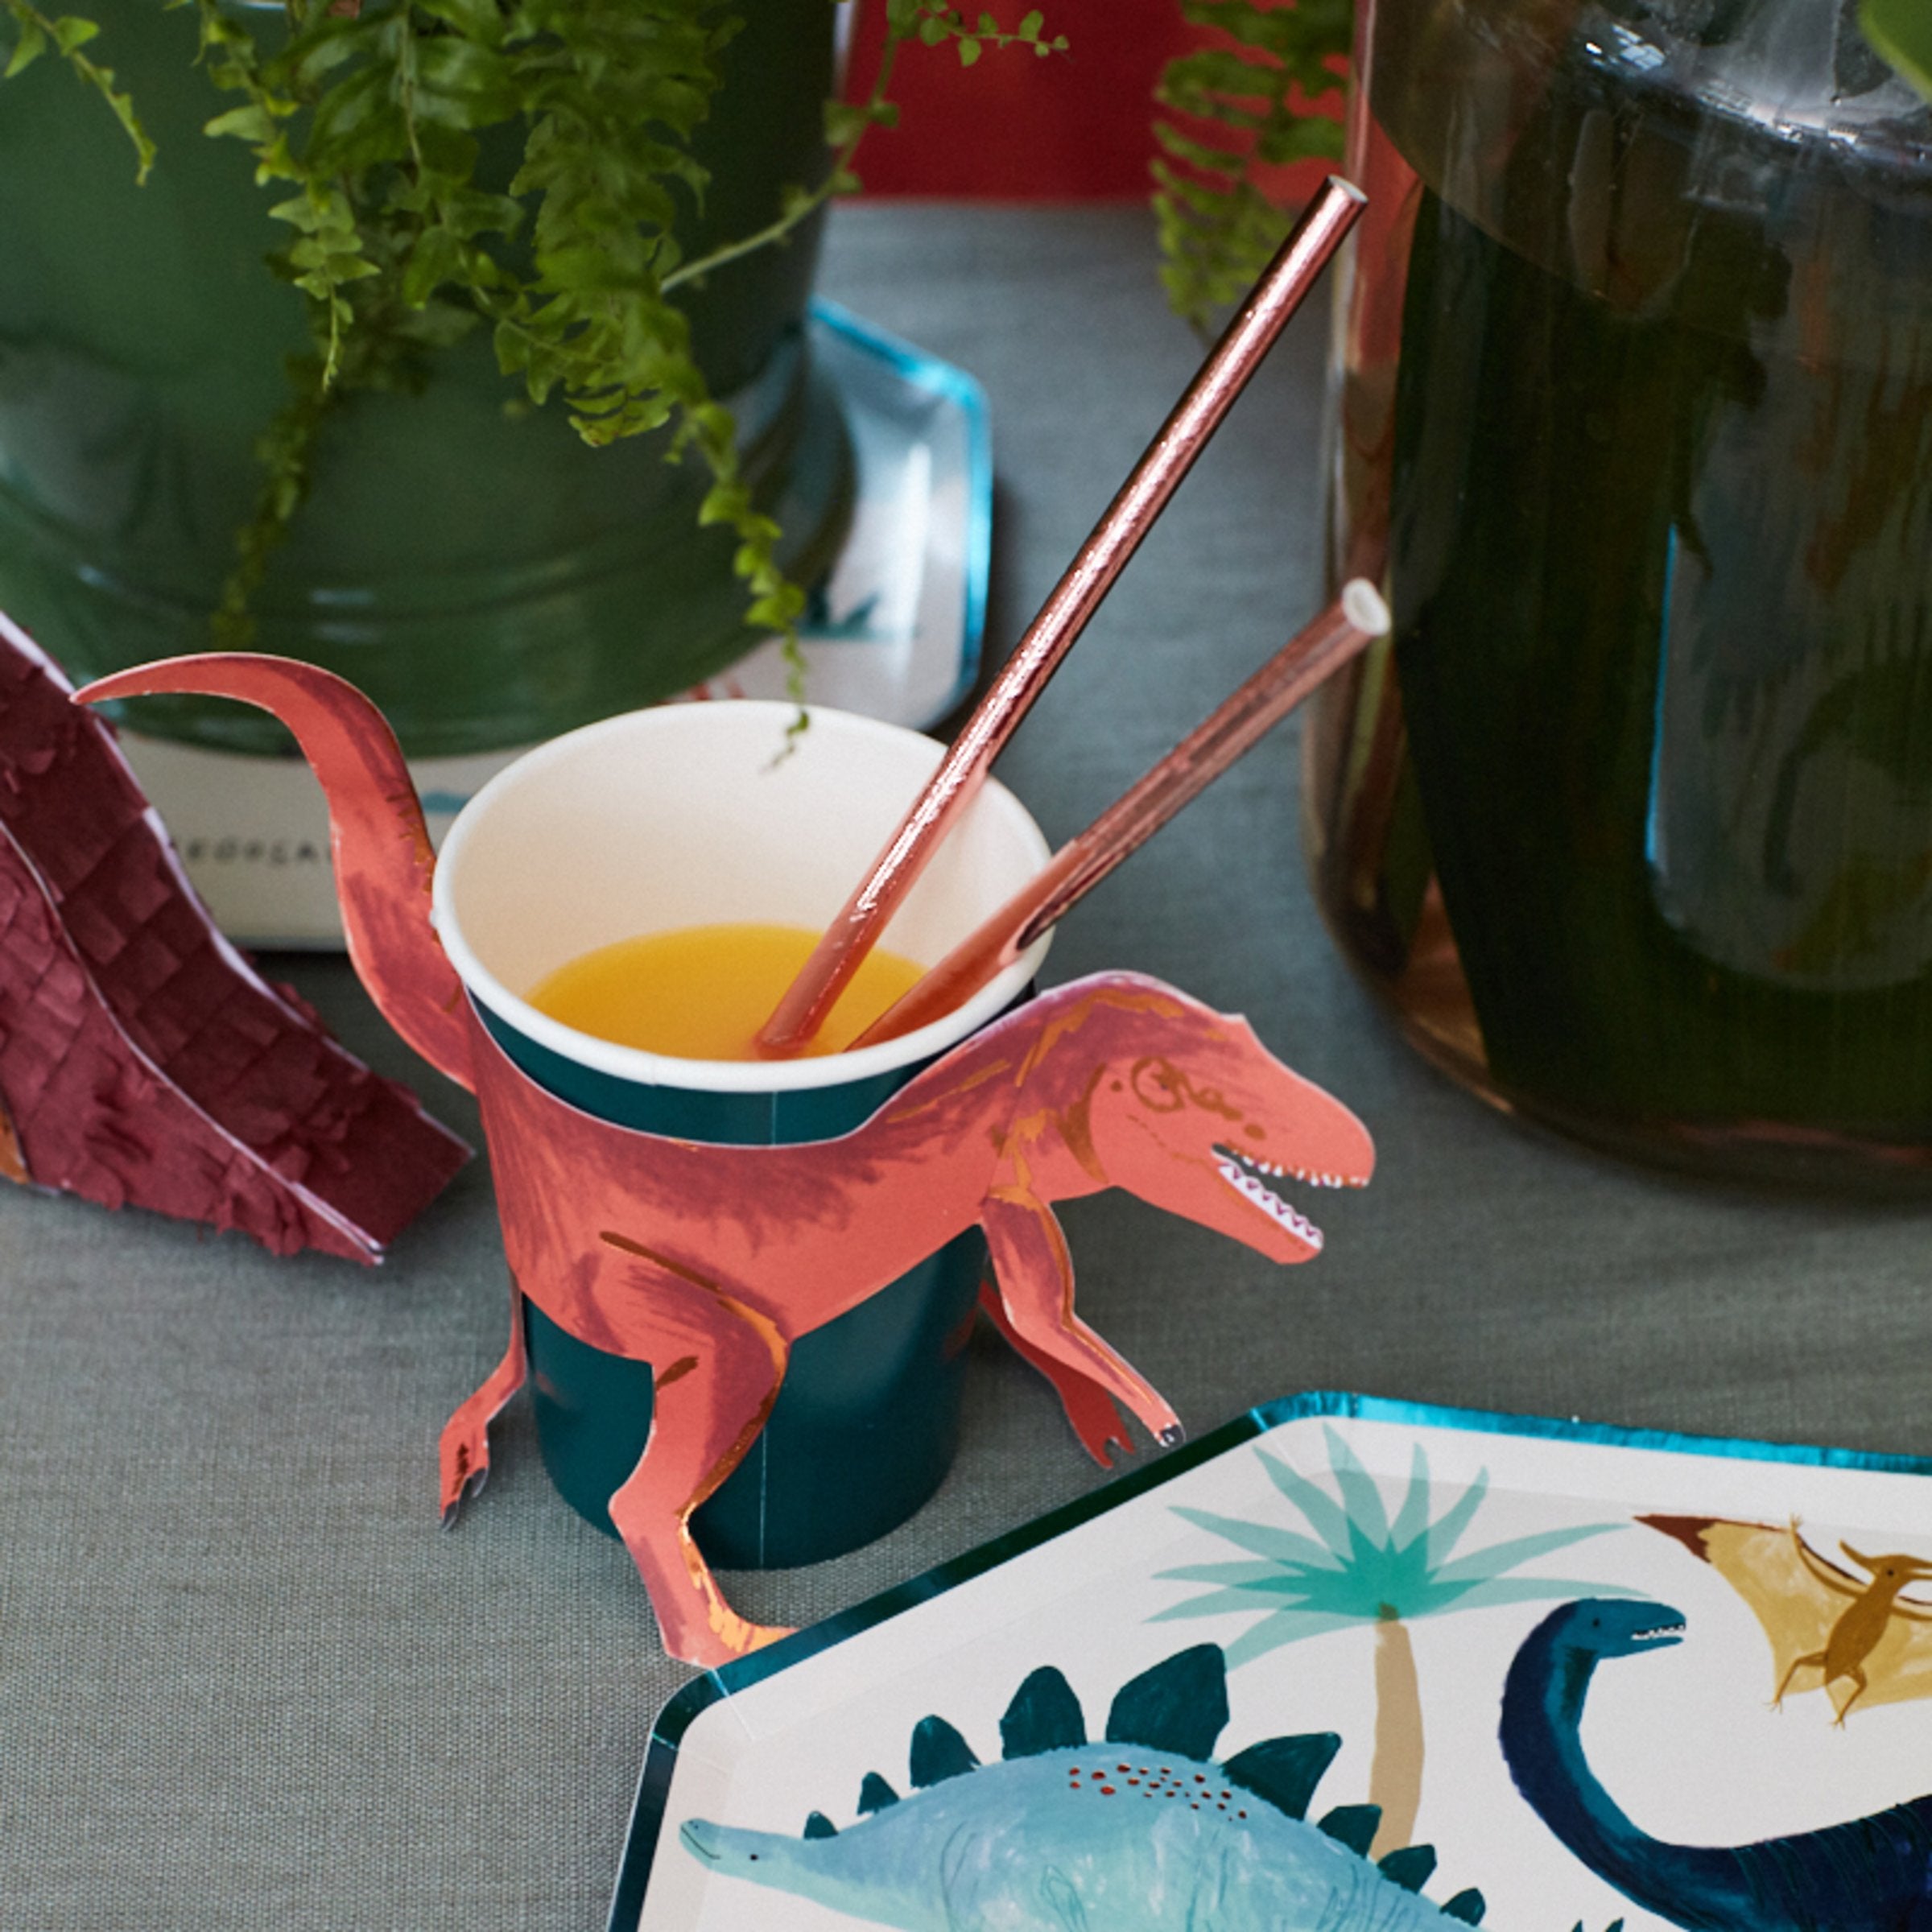 The 3D T-Rex detail on our dinosaur cups make the perfect dinosaur party decorations.